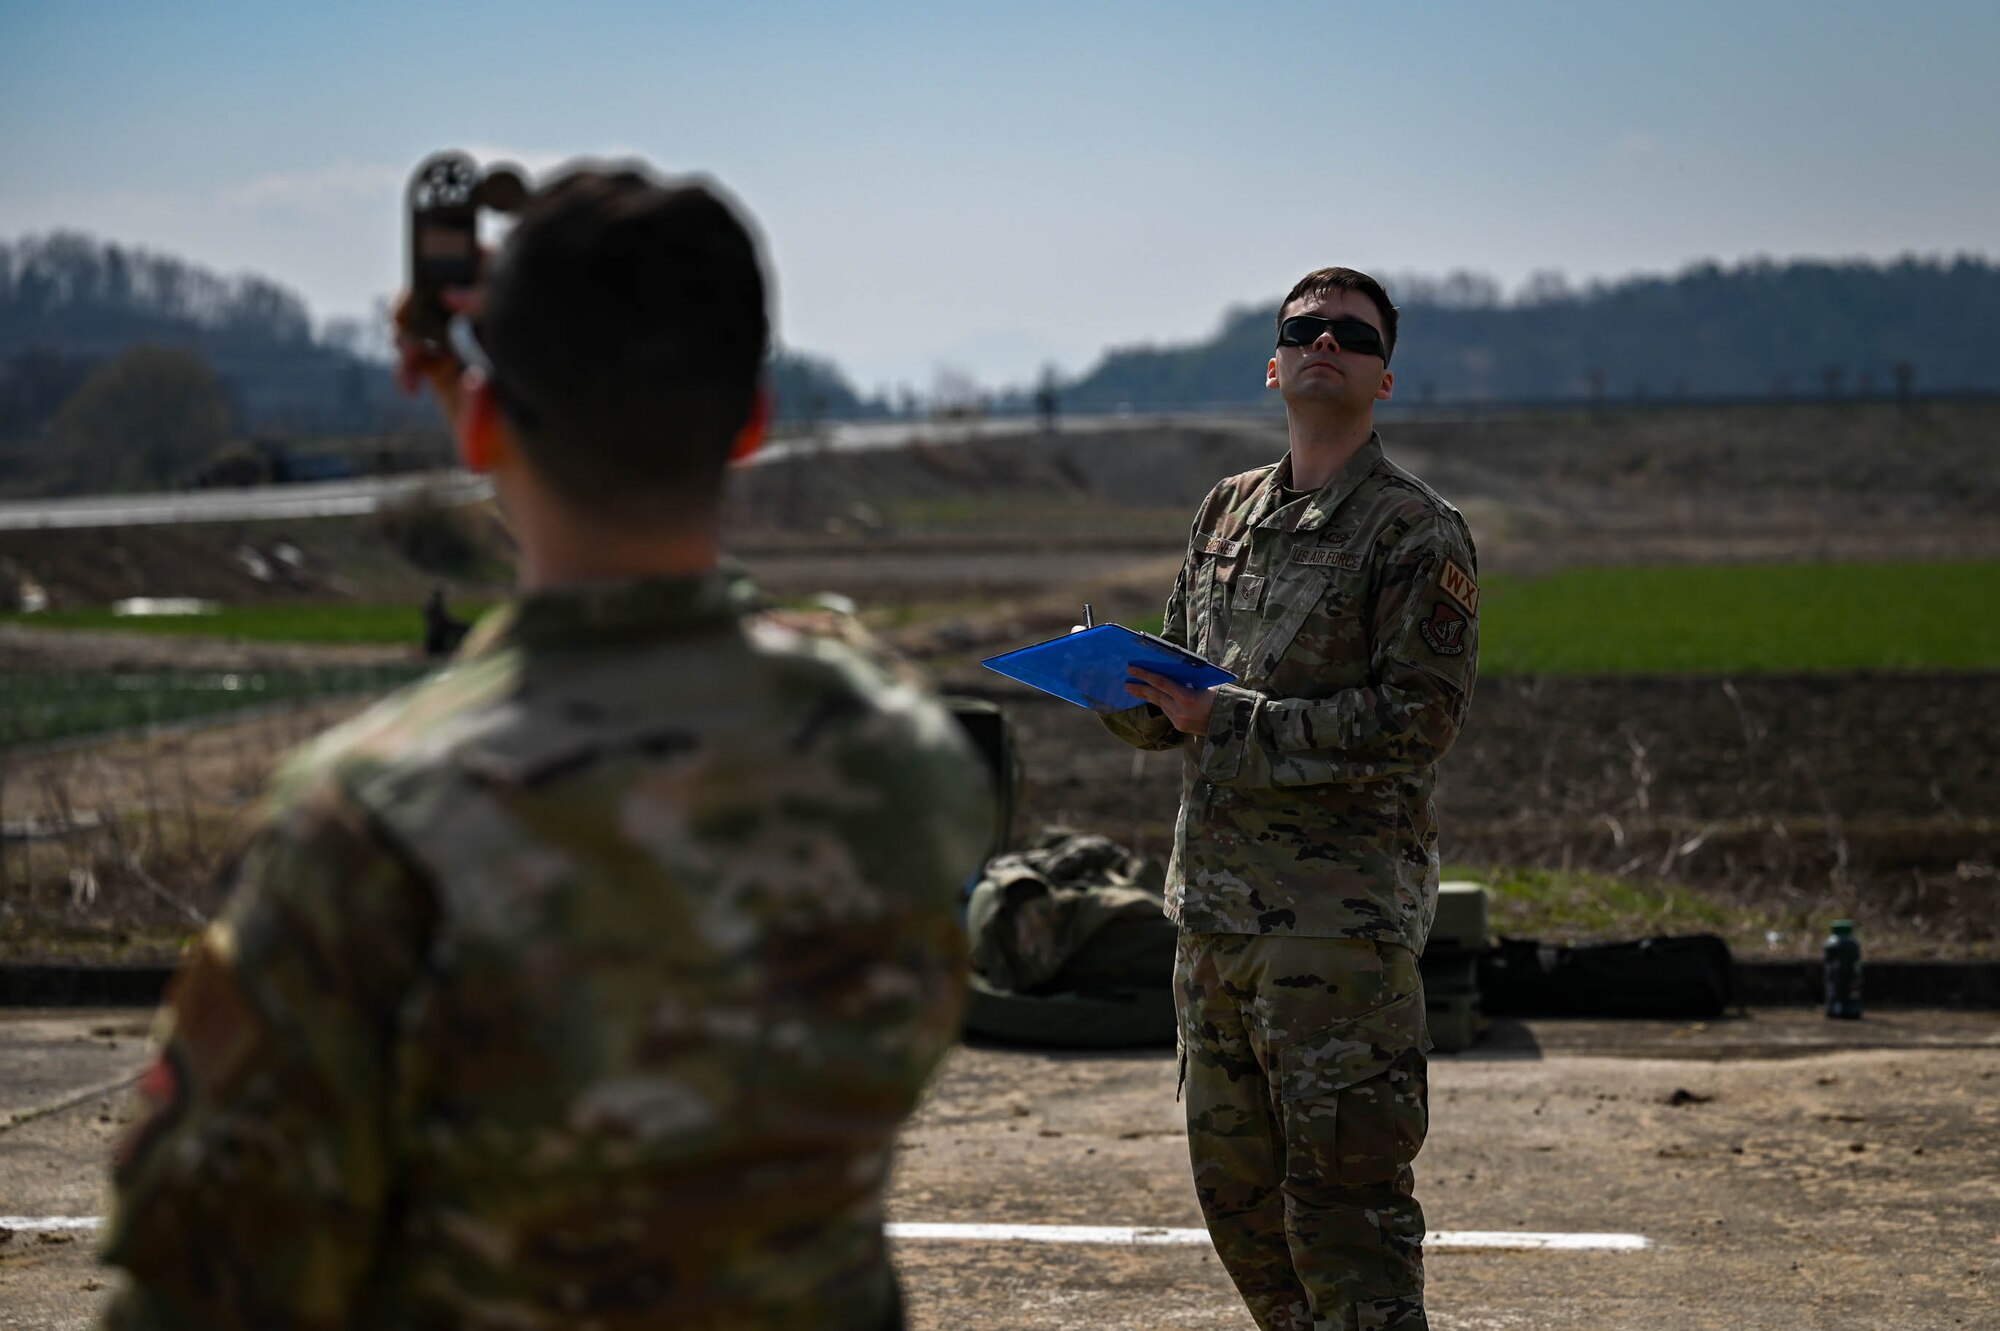 U.S. Air Force Staff Sgts. Race Gardner and Anthony Thornton, 51st Operations Support Squadron weather craftsmen, monitor weather equipment at an emergency landing site training event near Namji, Republic of Korea, March 13, 2024.